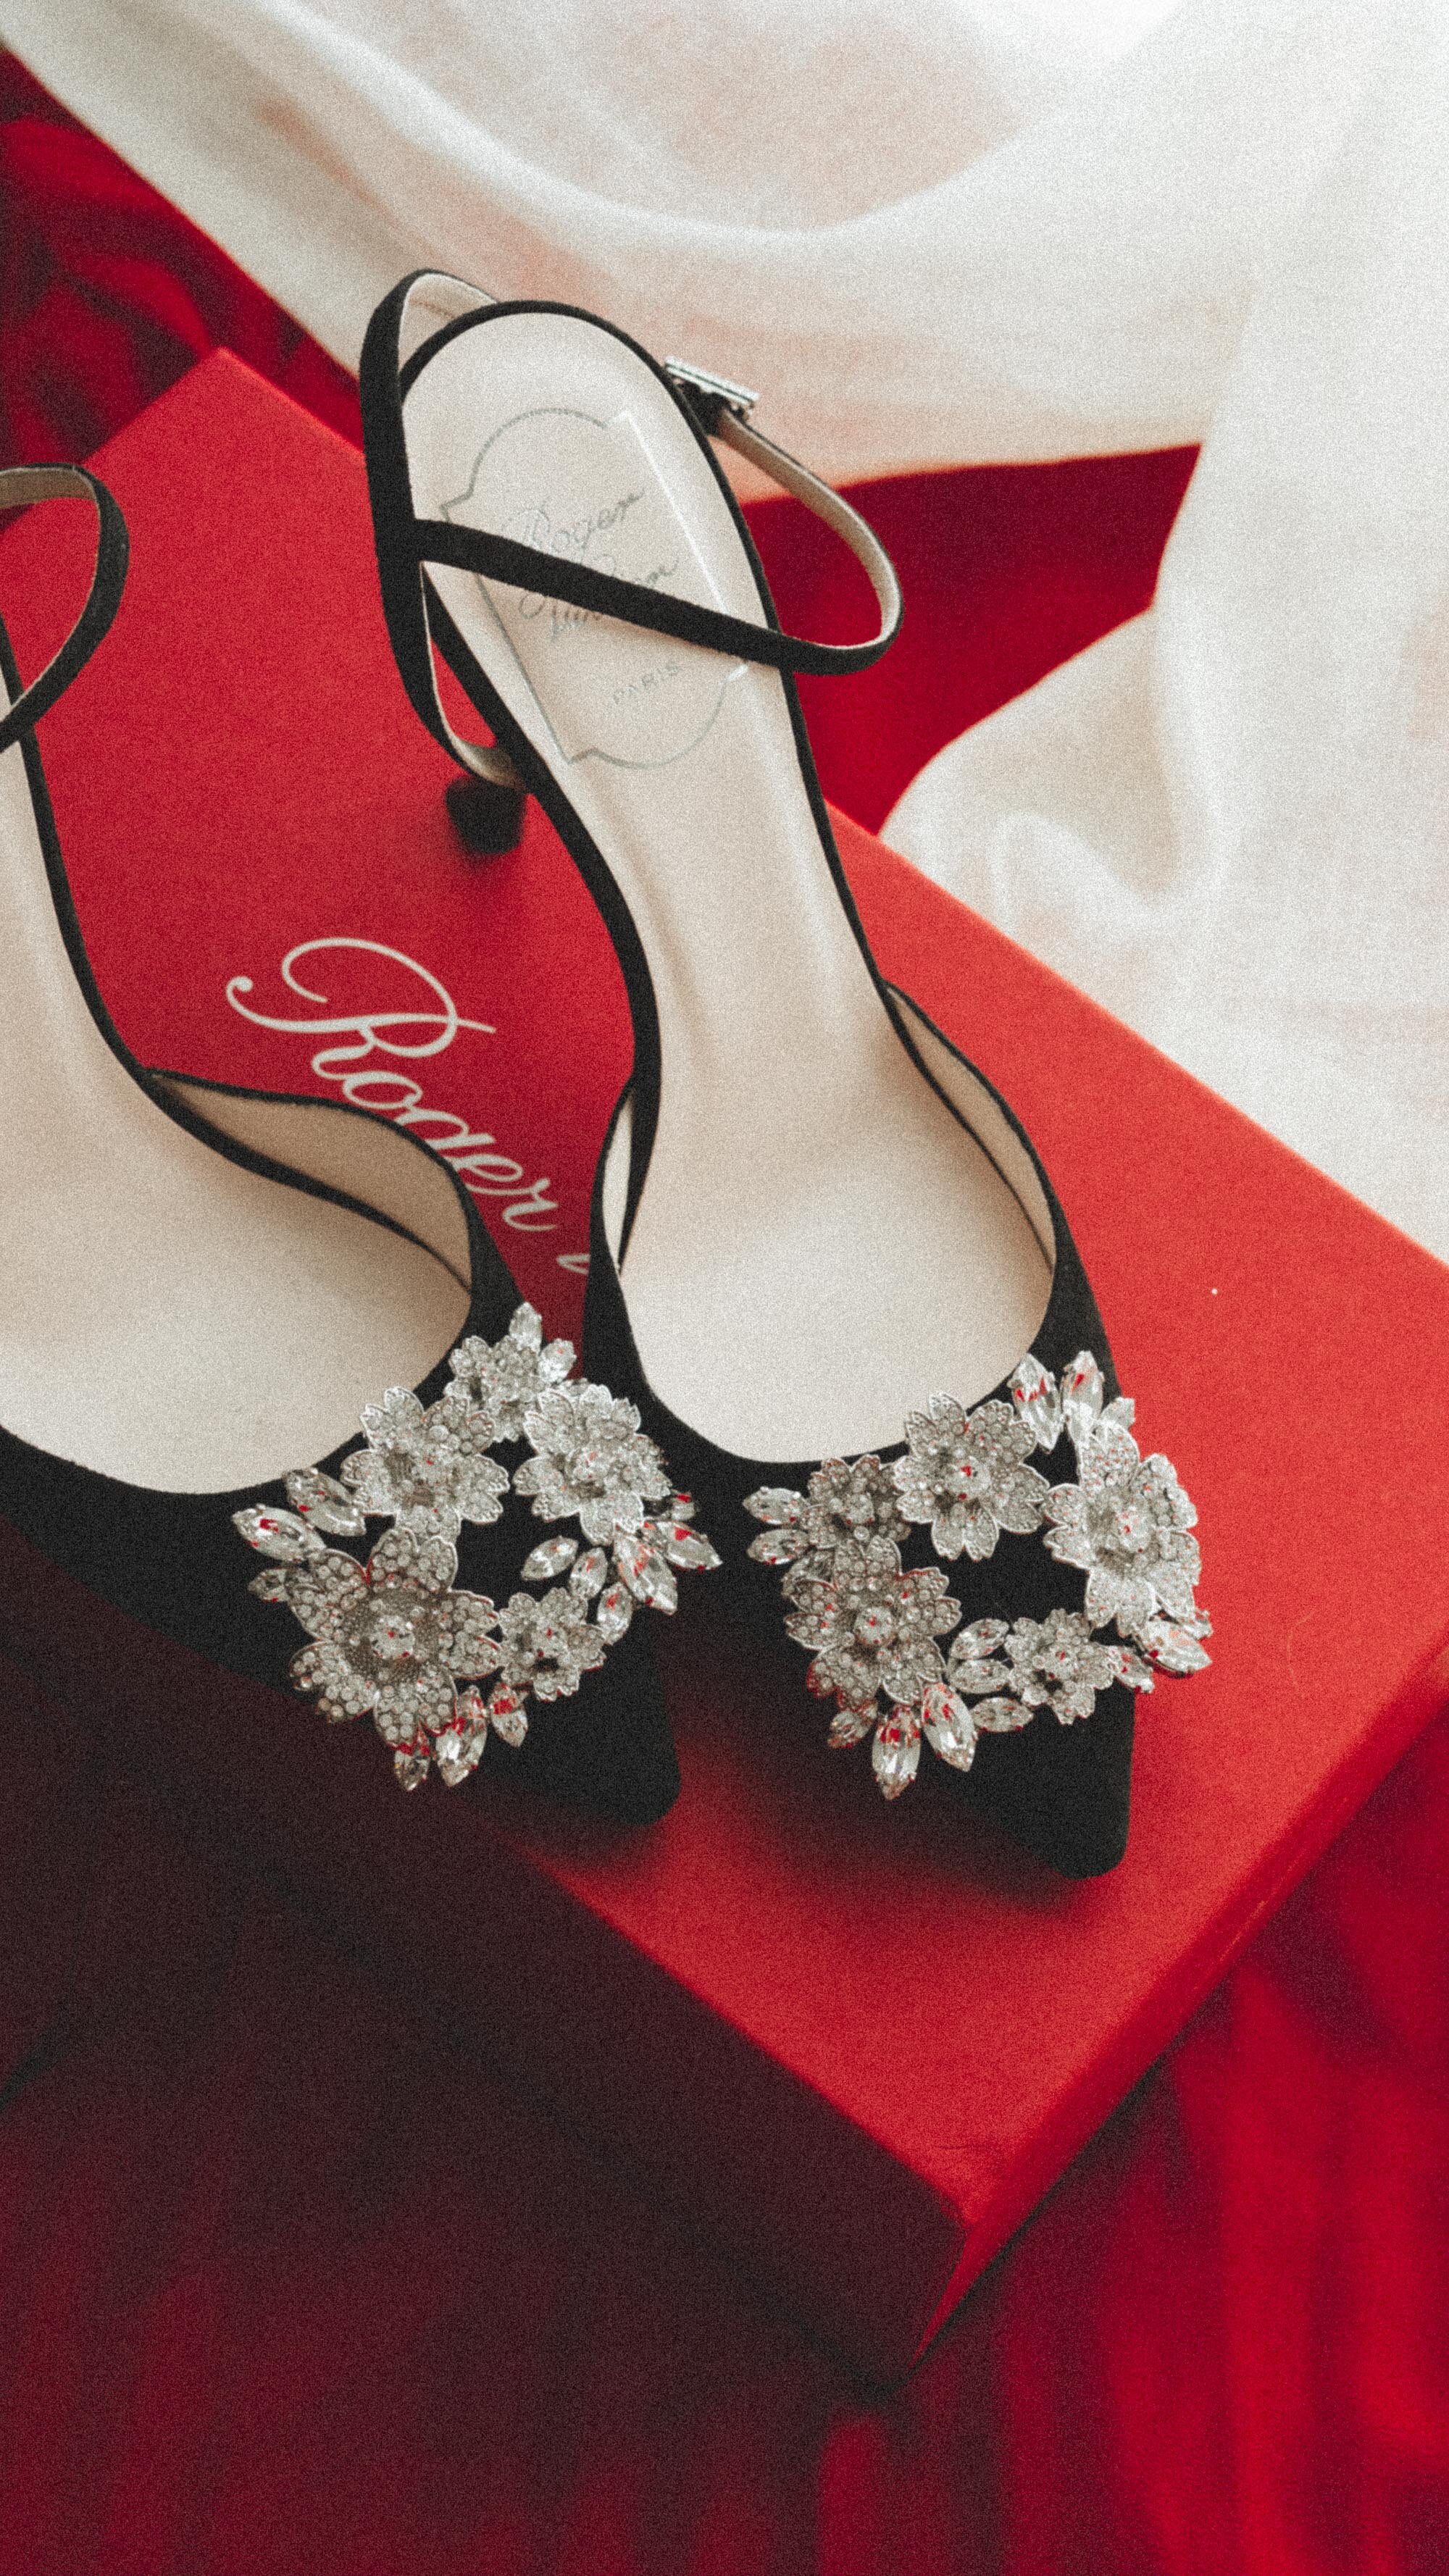 Chicest holiday heels to sparkle in. Sarah Butler of @sarahchristine wearing Roger Vivier Sling Back RV Bouquet Strass Buckle Pumps. The heels celebrate sophisticated and precious femininity --5.jpg